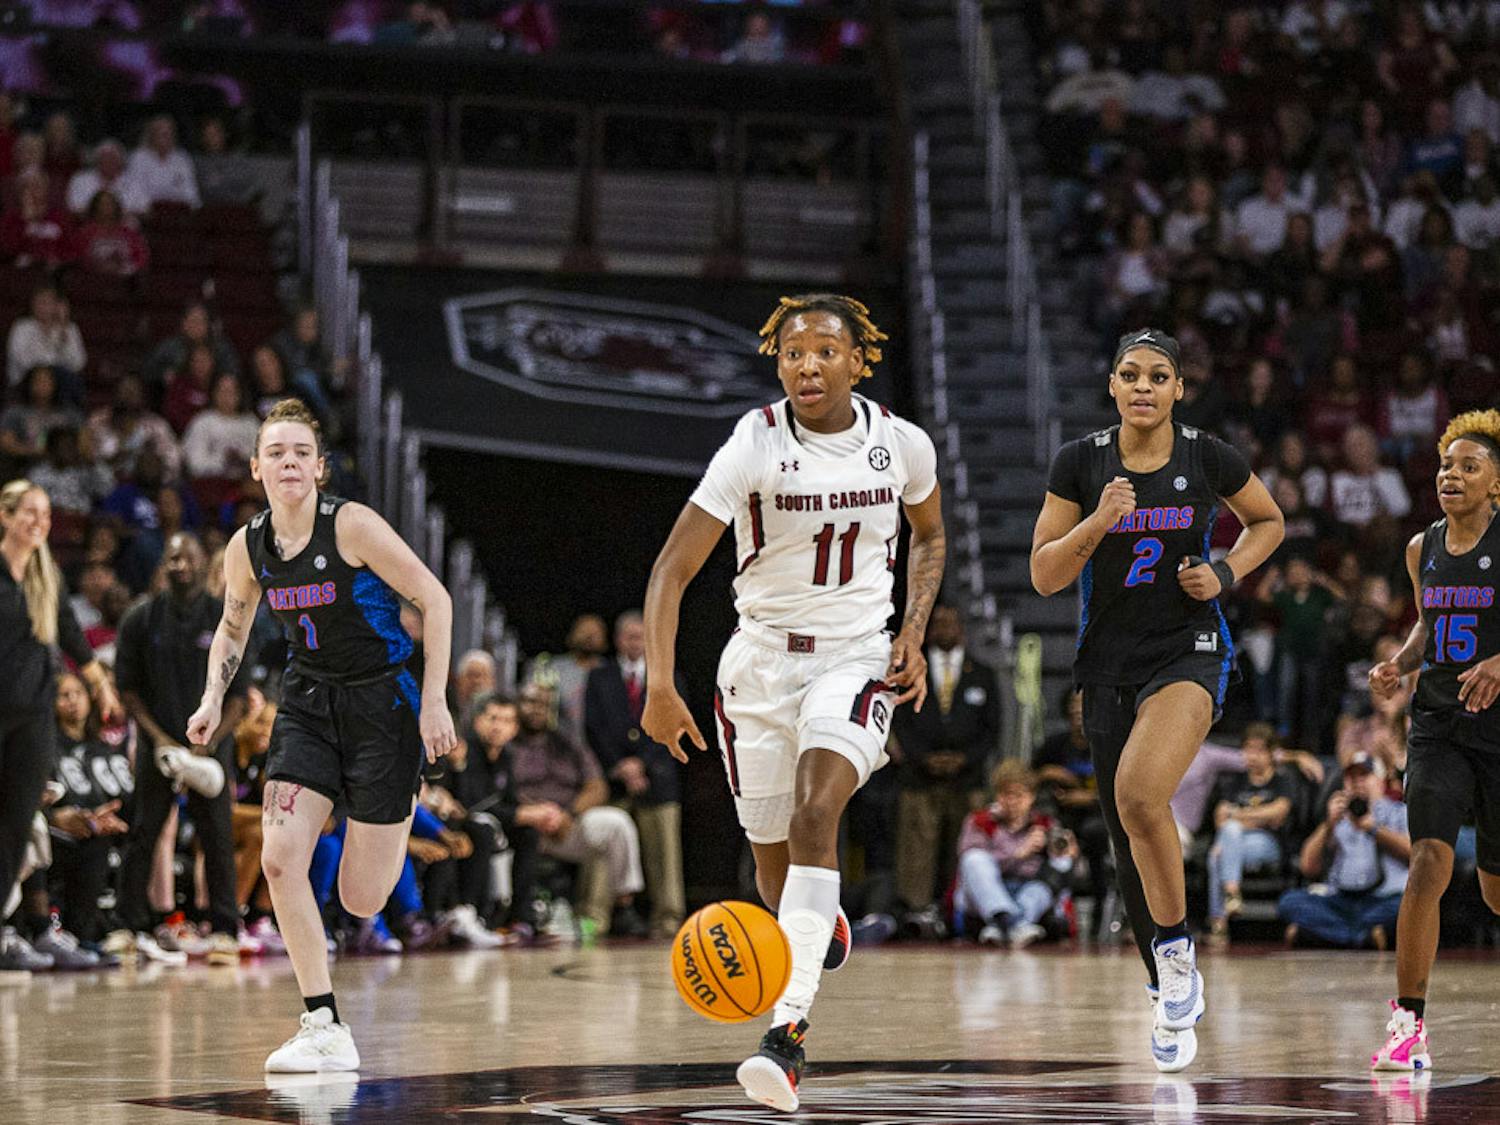 Freshman guard Talaysia Cooper runs the ball down the court during the matchup between South Carolina and Florida at Colonial Life Arena on Feb. 16, 2023. The Gamecocks beat the Gators 87-56.